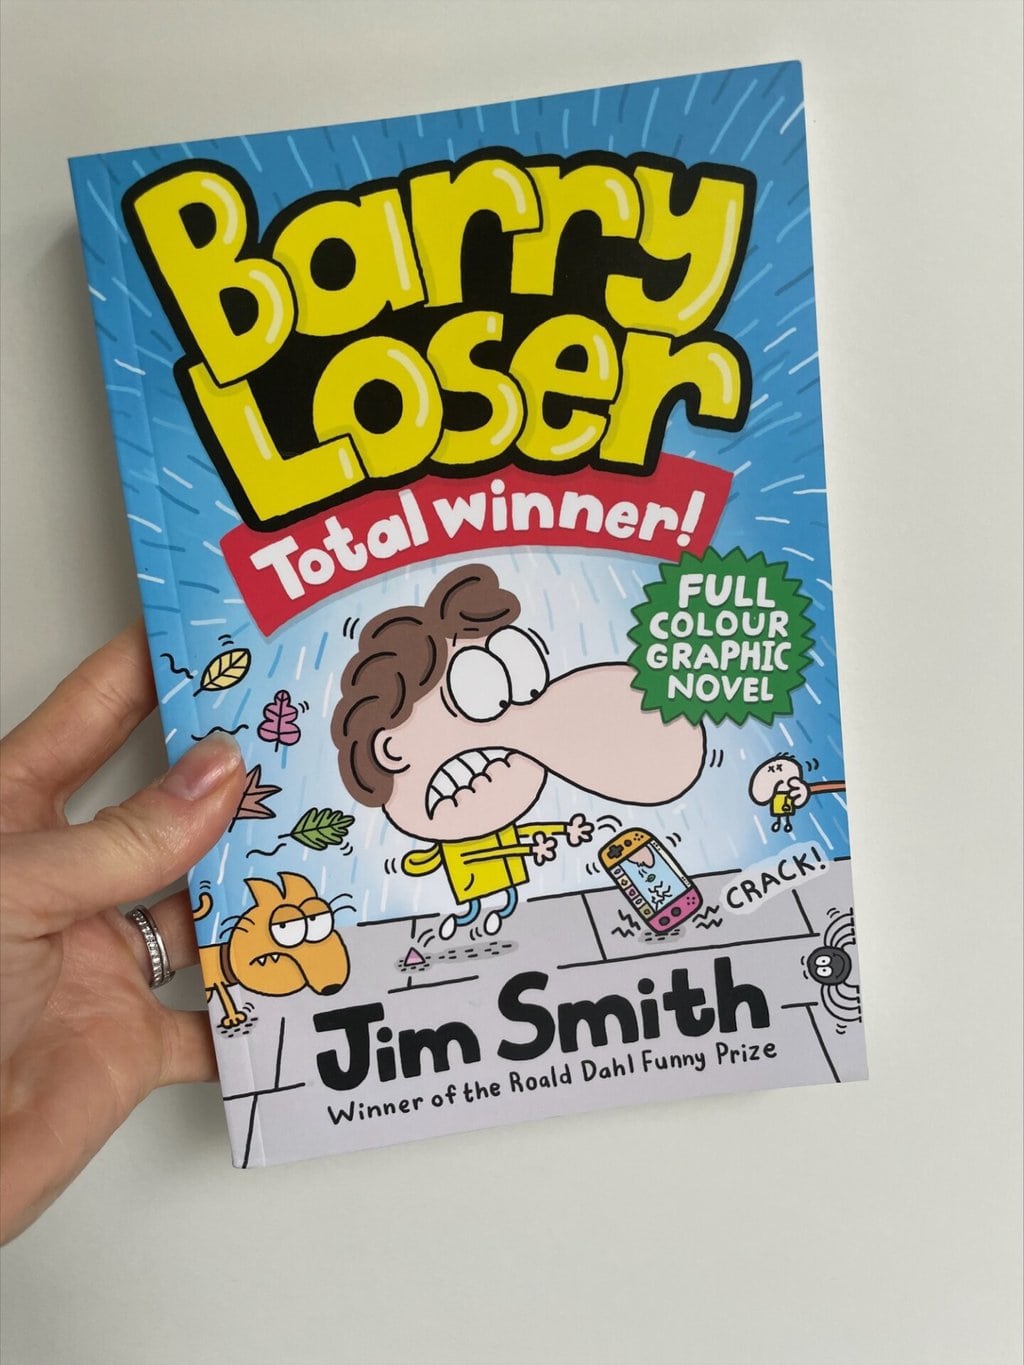 Barry Loser: Total Winner! – Jim Smith (author and illustrator), Farshore (imprint of HarperCollins) (publisher) (recommended reading age: 7 plus)